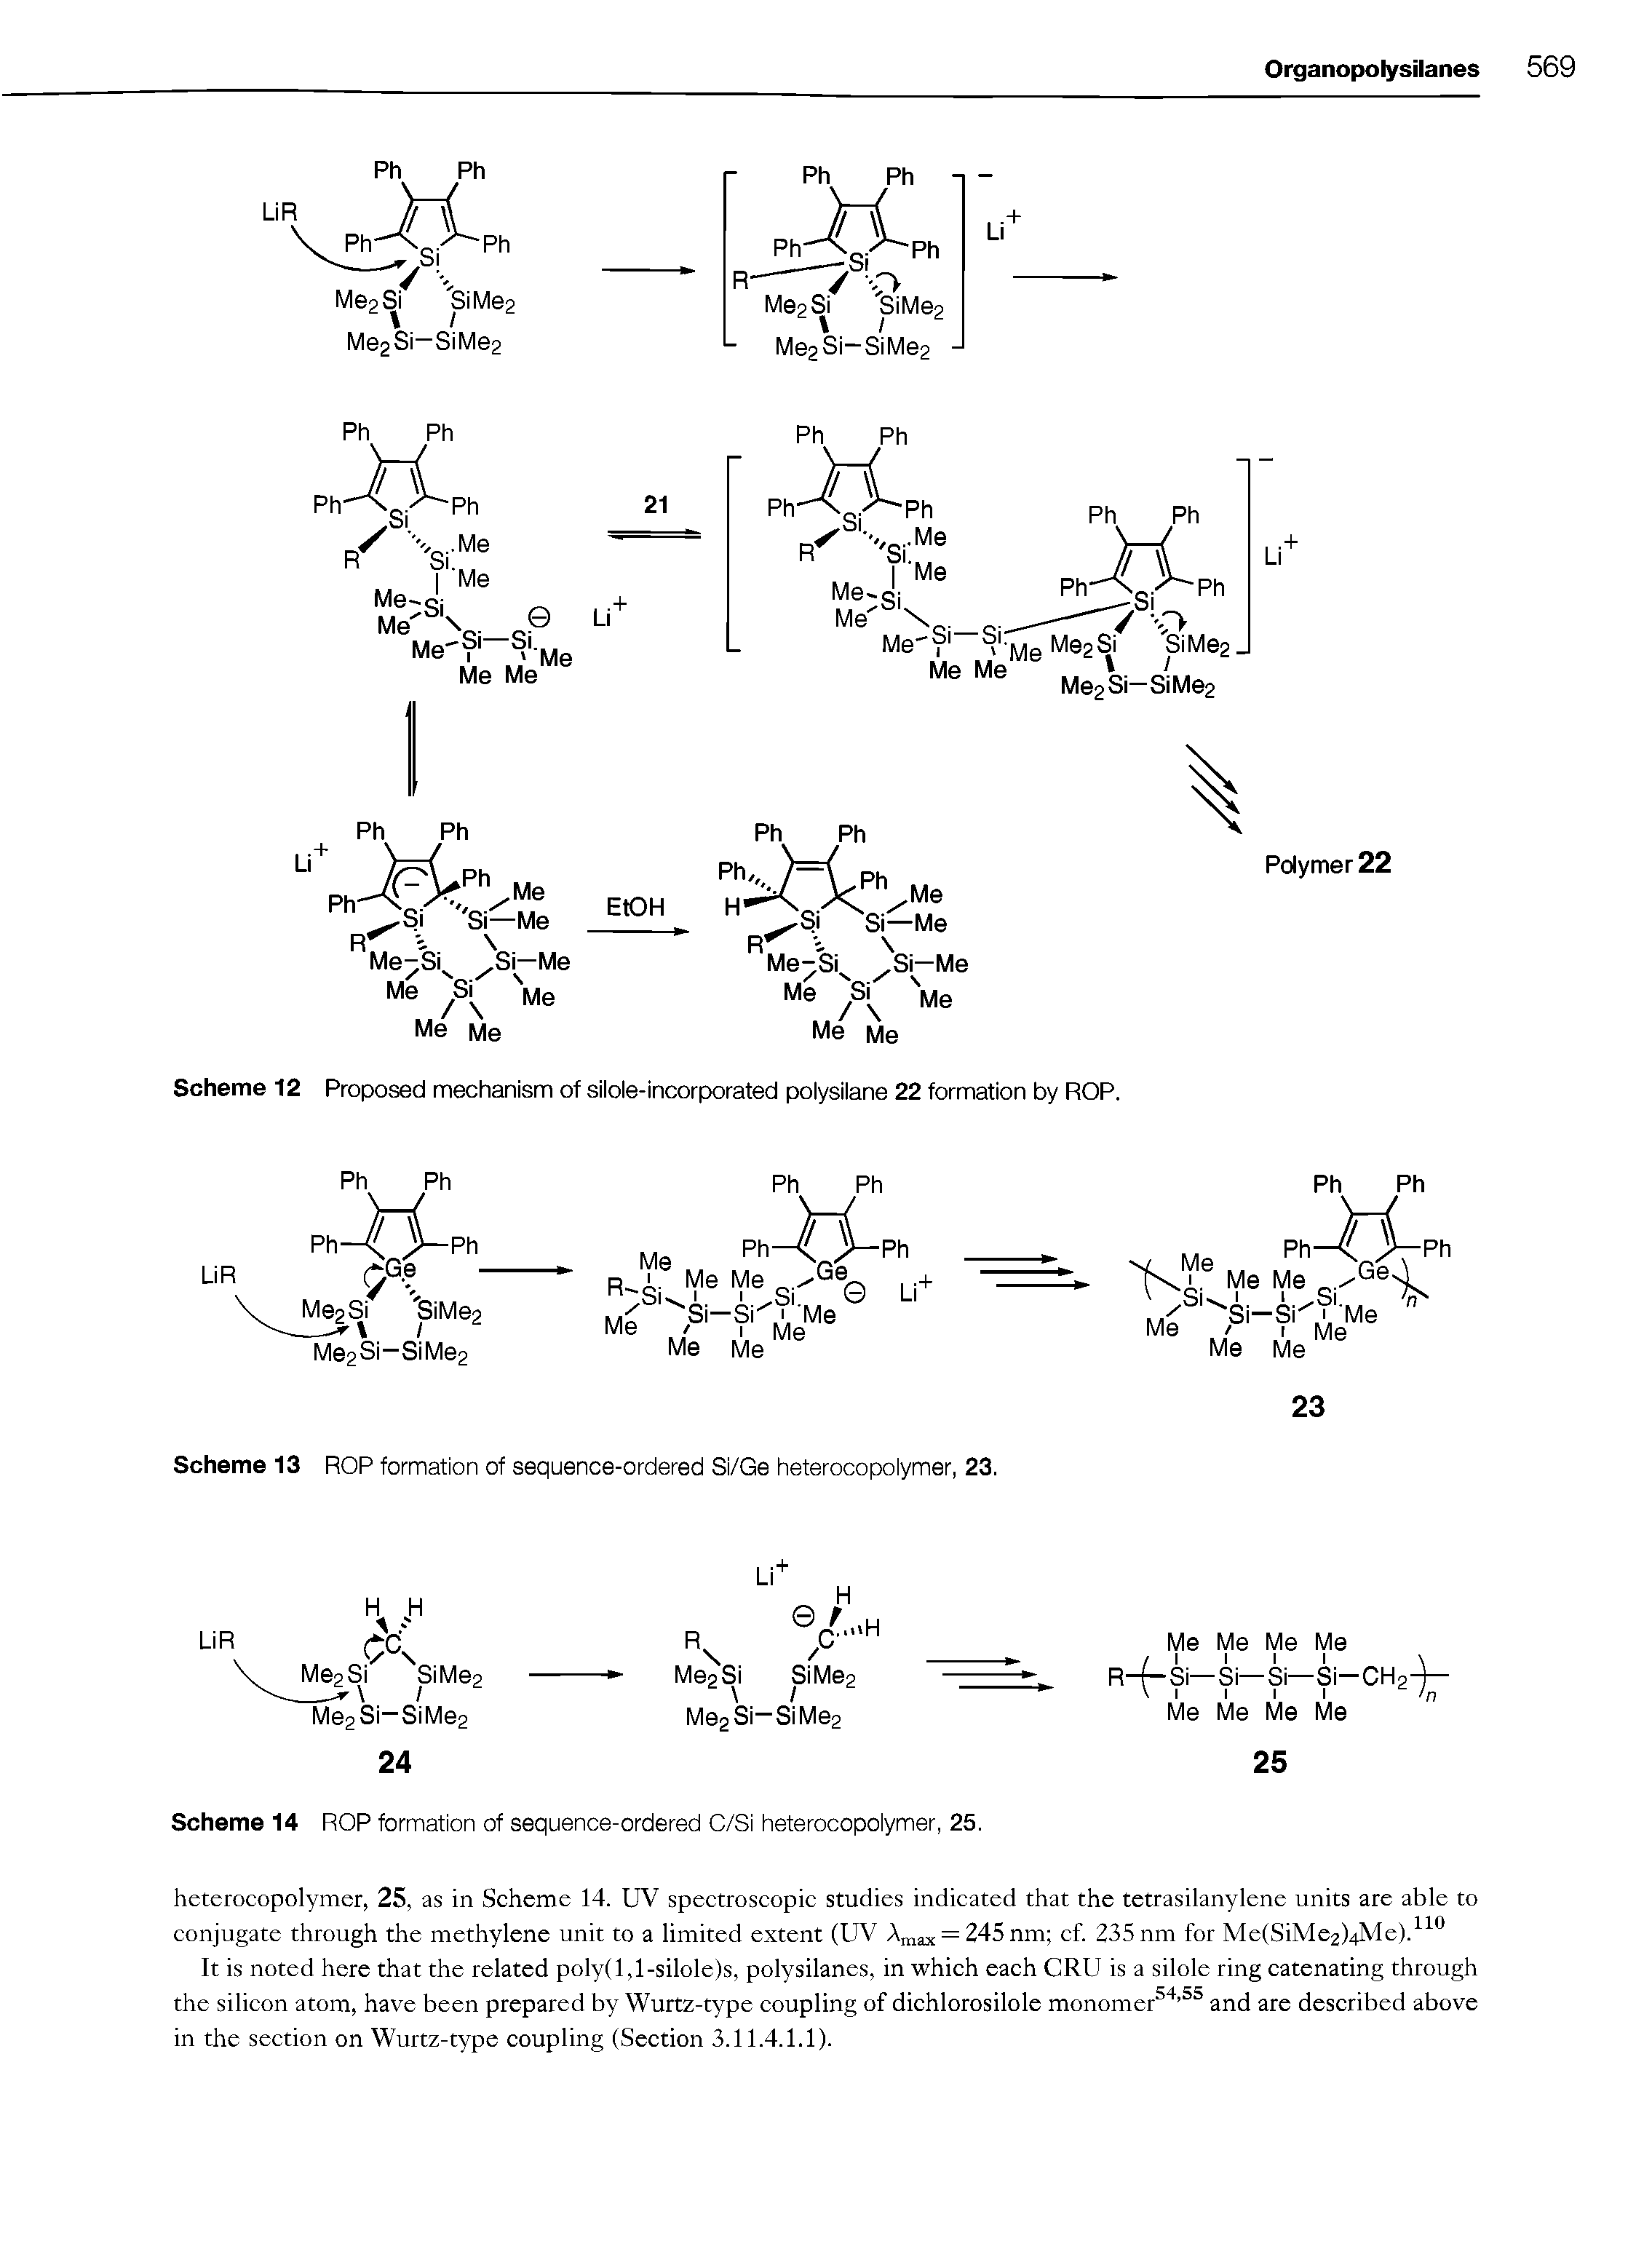 Scheme 12 Proposed mechanism of silole-incorporated polysilane 22 formation by ROP.